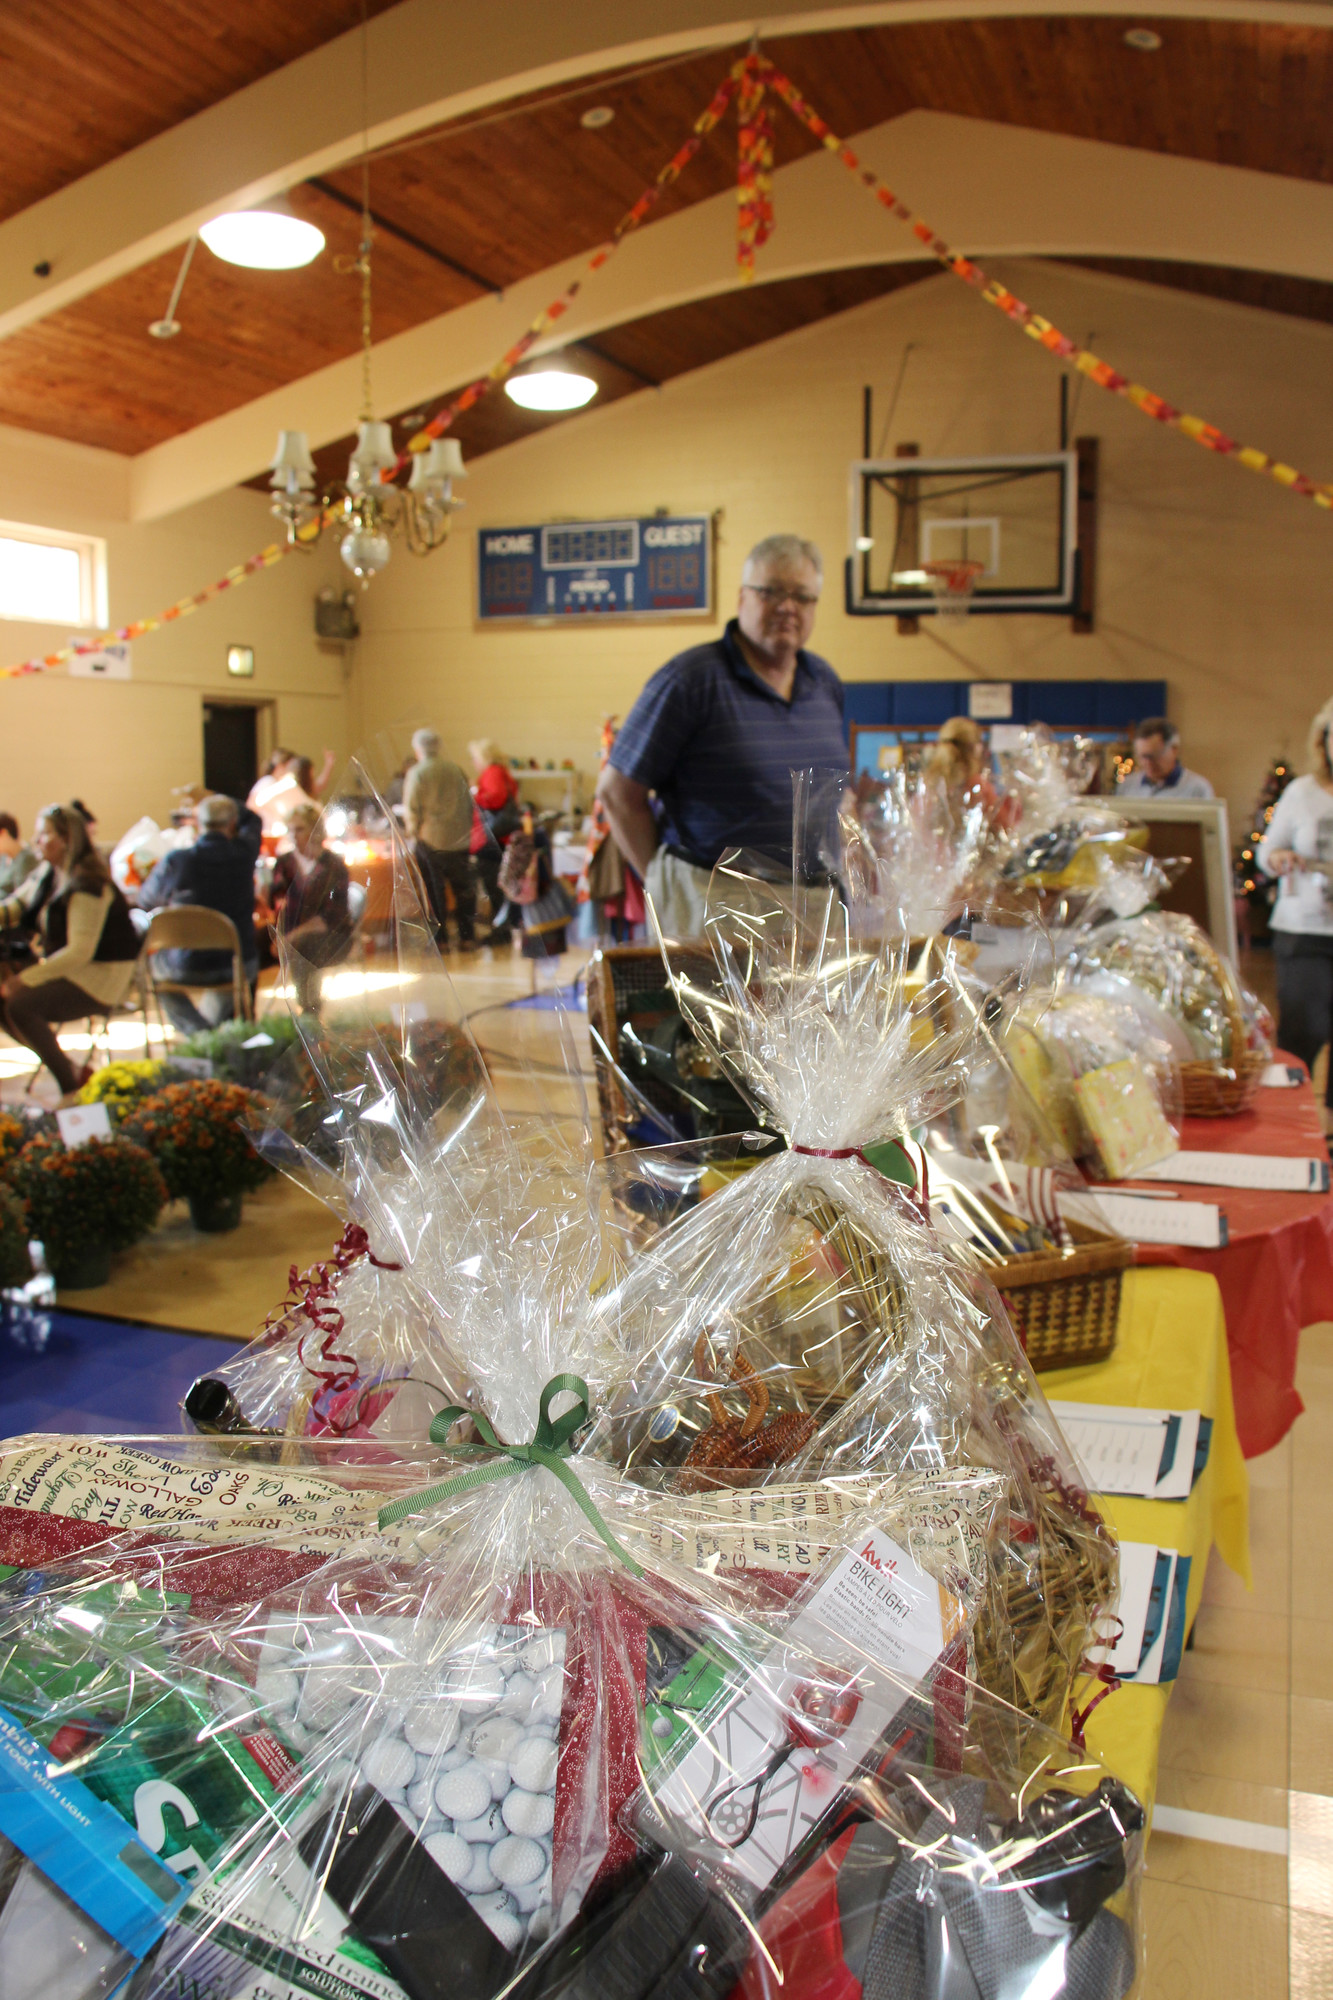 Walter Wagner checked out some of the baskets that were going to auctioned off at St. Peter’s Fall Festival.